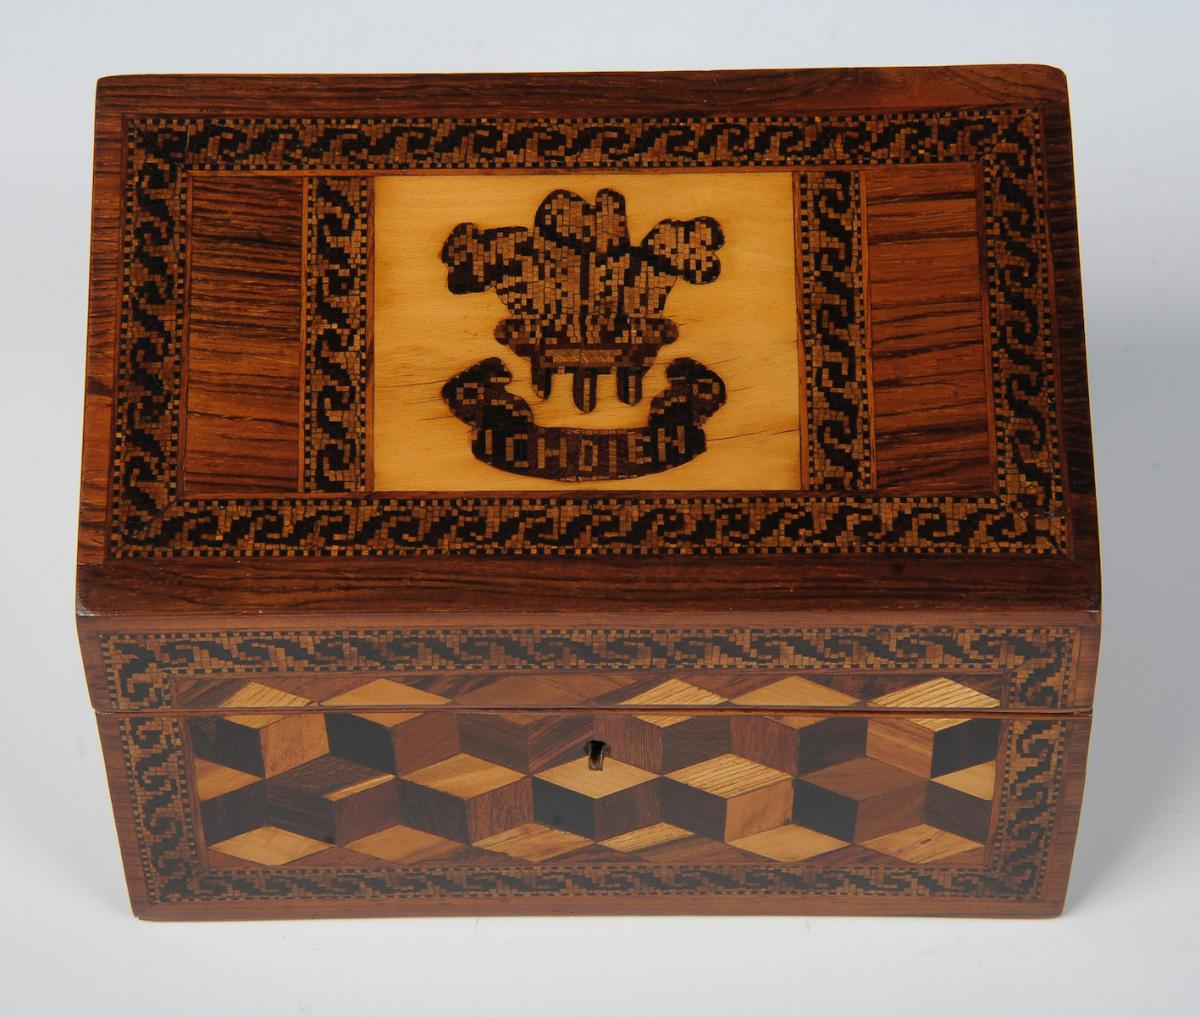 Tunbridge Ware Stationery Box with Prince of Wales Feathers and Motto